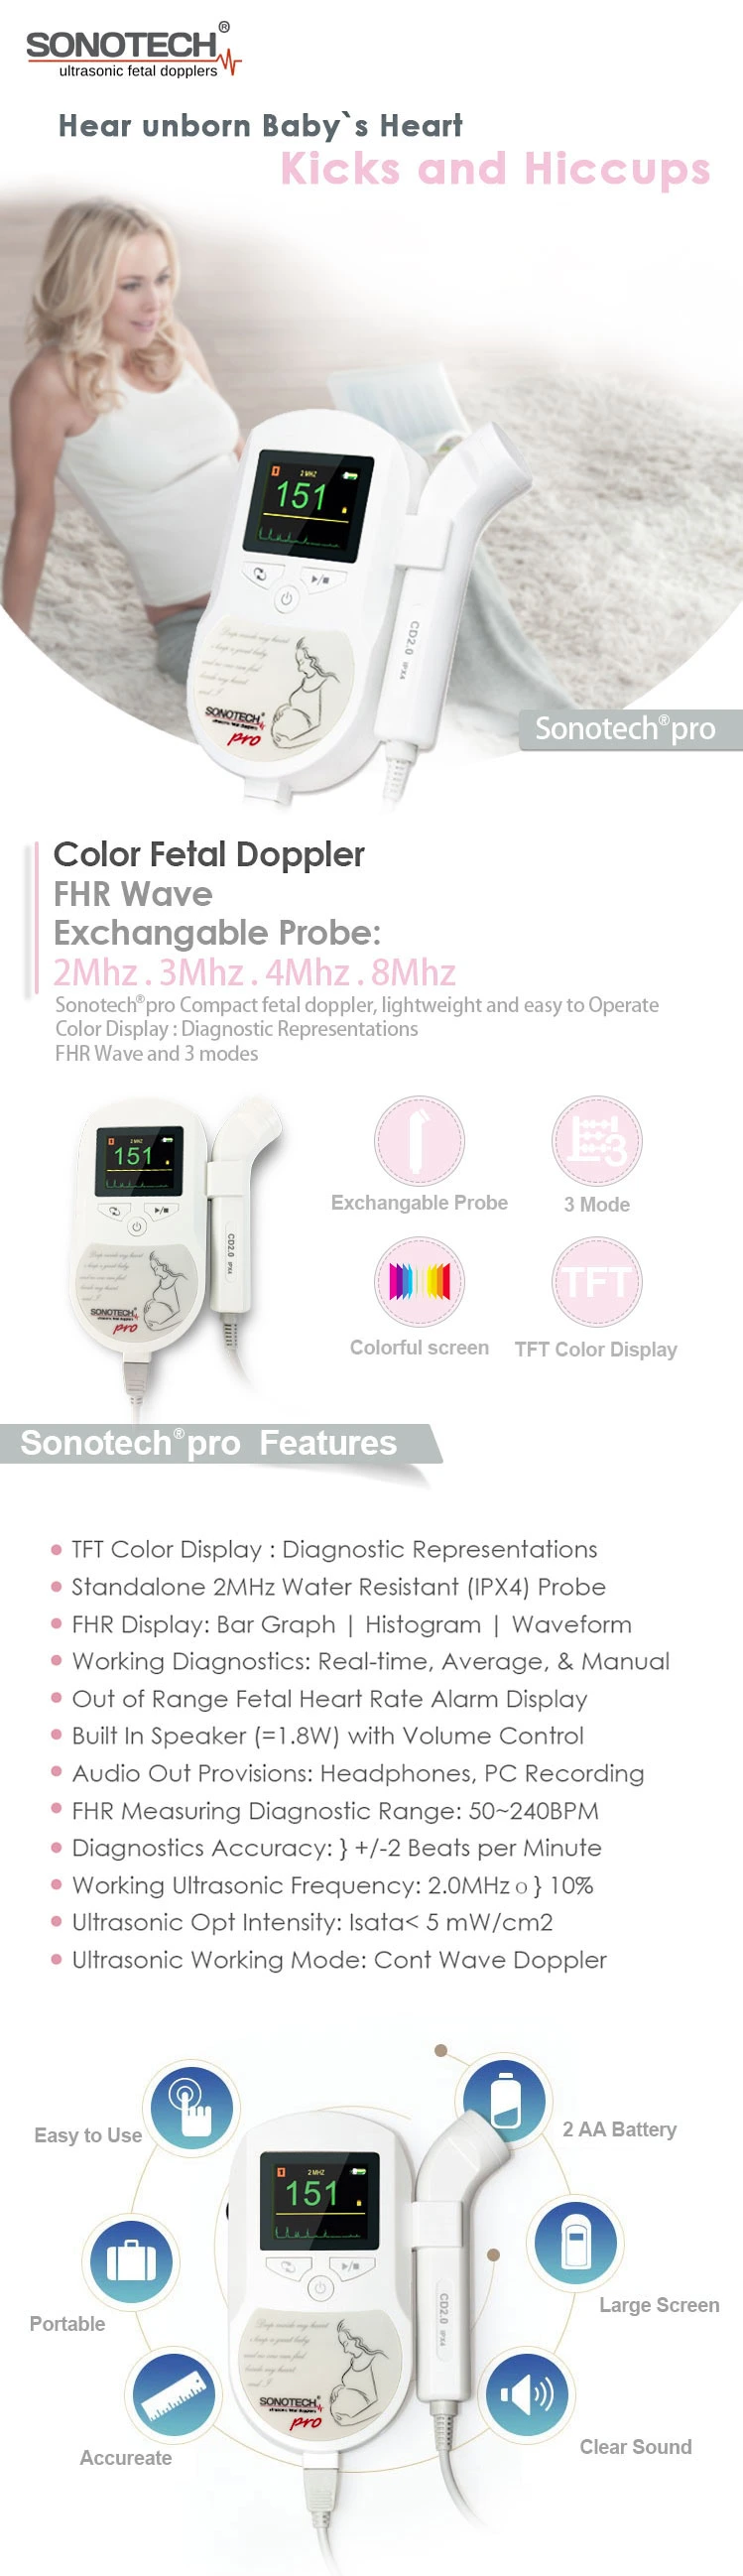 CE Marked Big Color Display Fetal Monitor /Baby Heartbeat Fetal Doppler Price